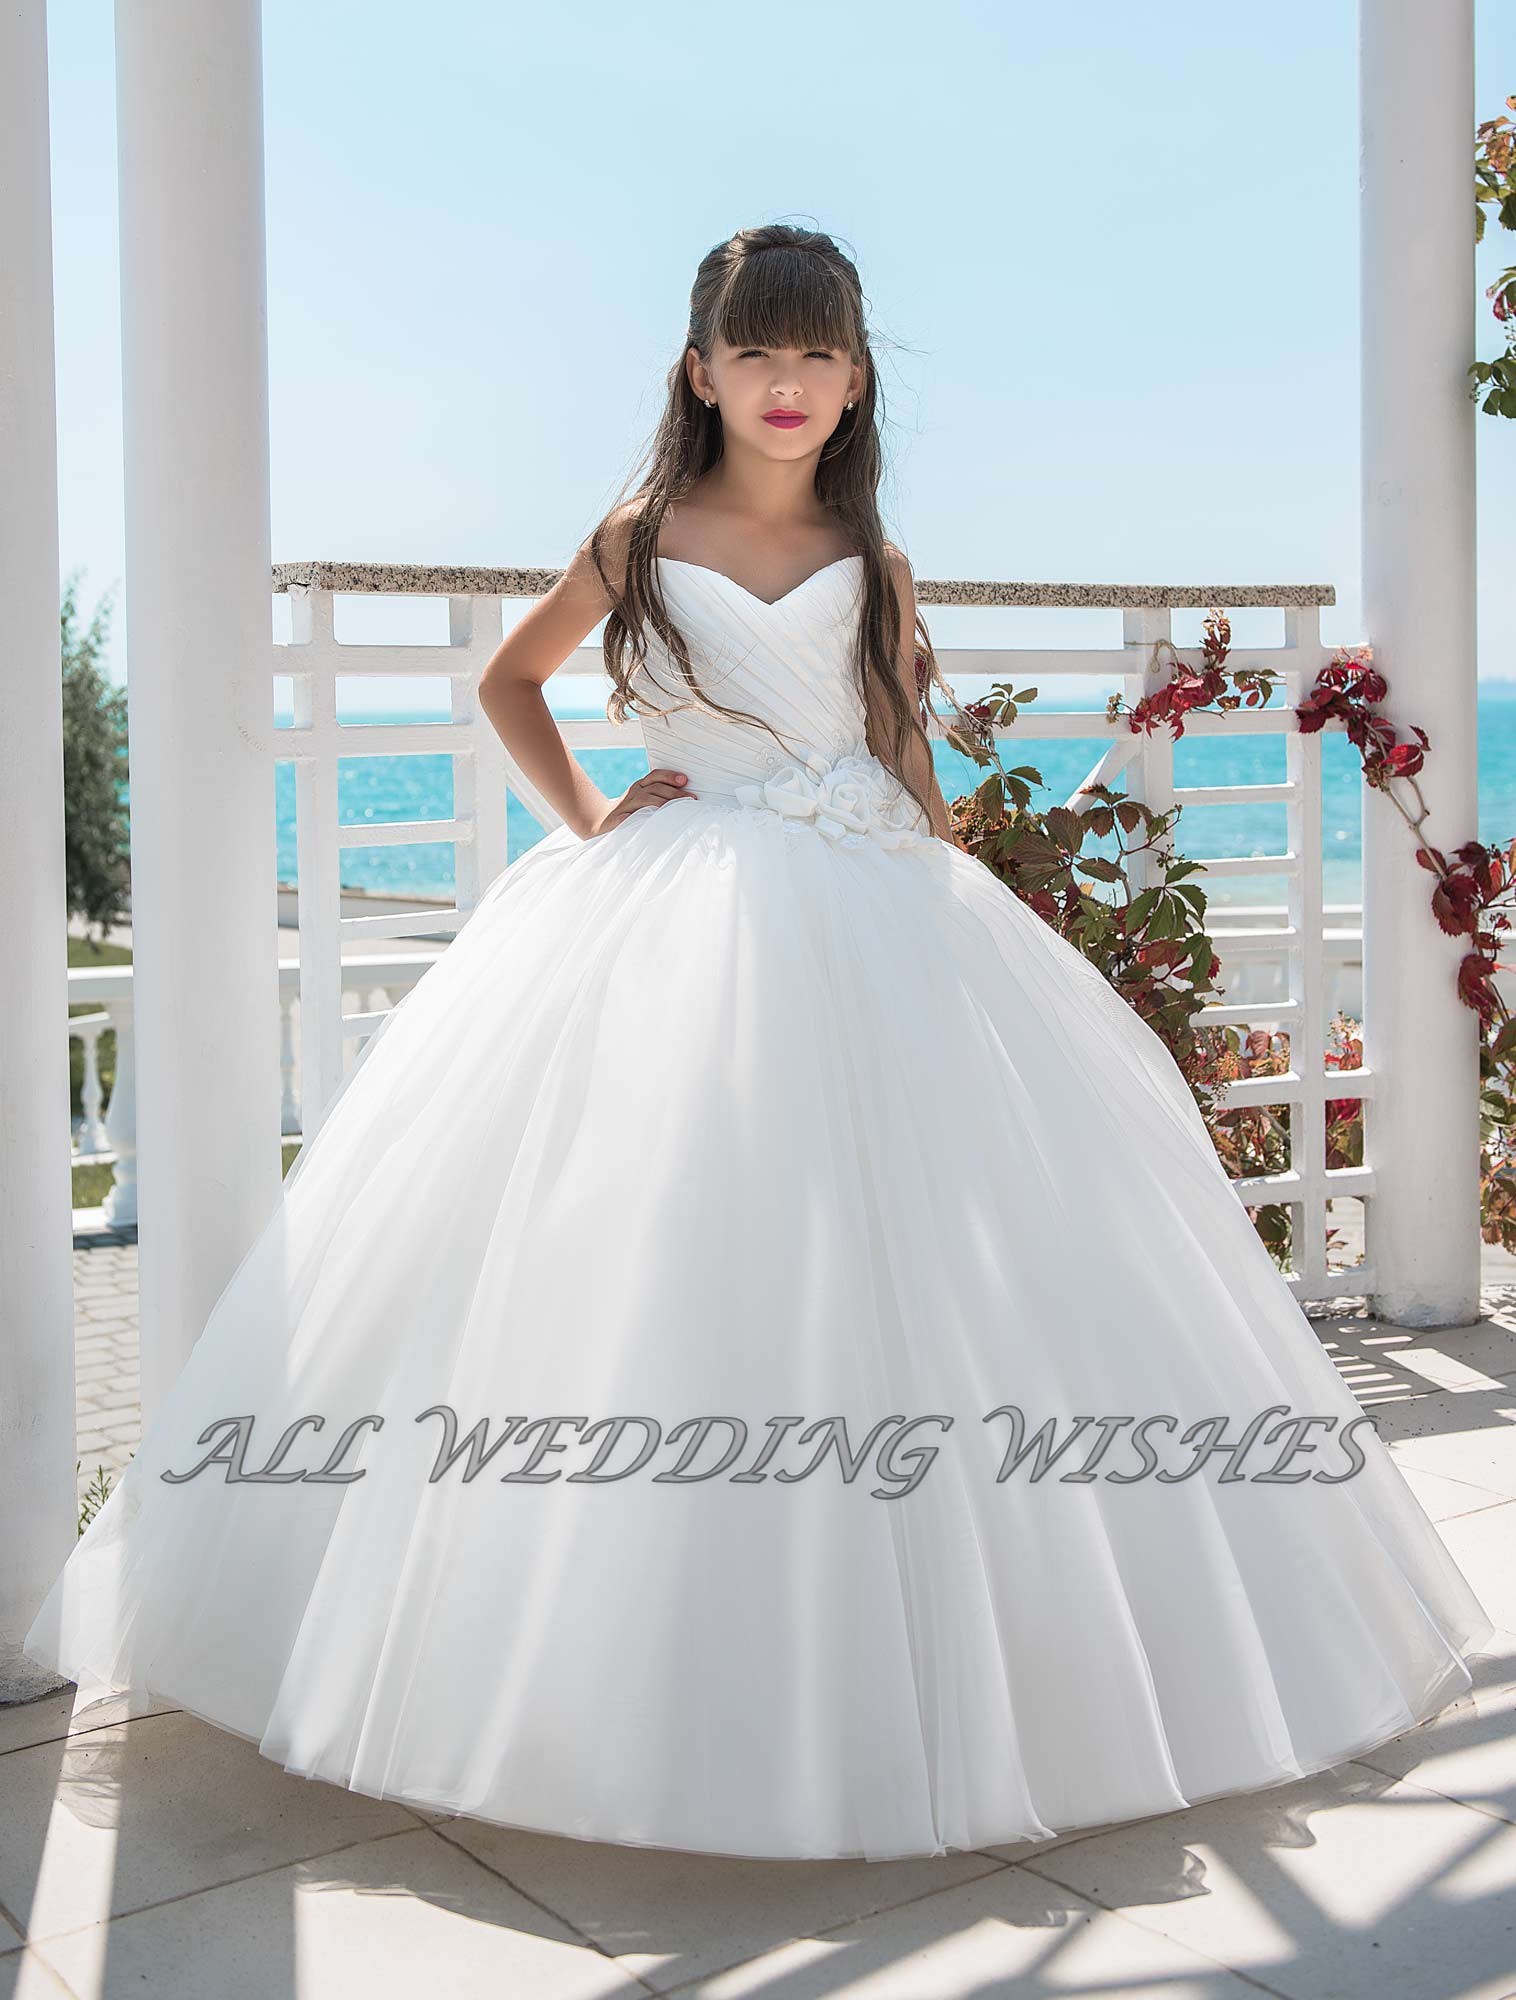 Style 20-0333 – All Wedding Wishes